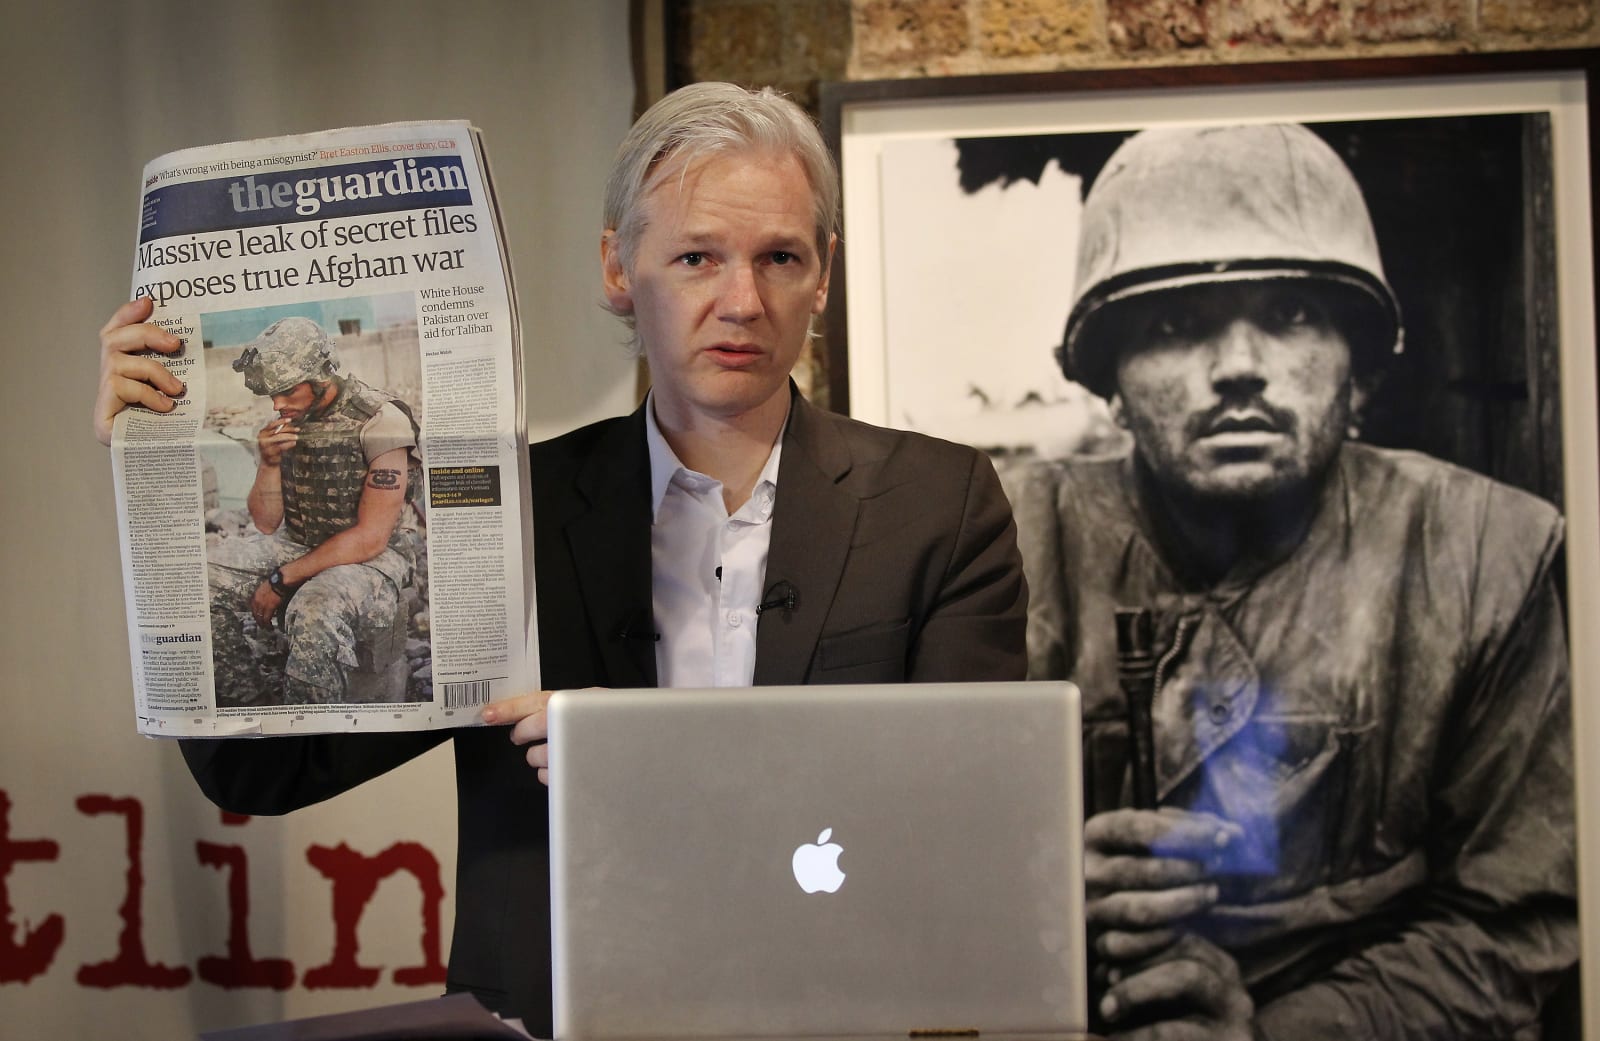 Julian Assange Hosts A Press Conference Over Afghan War Diary Leaks